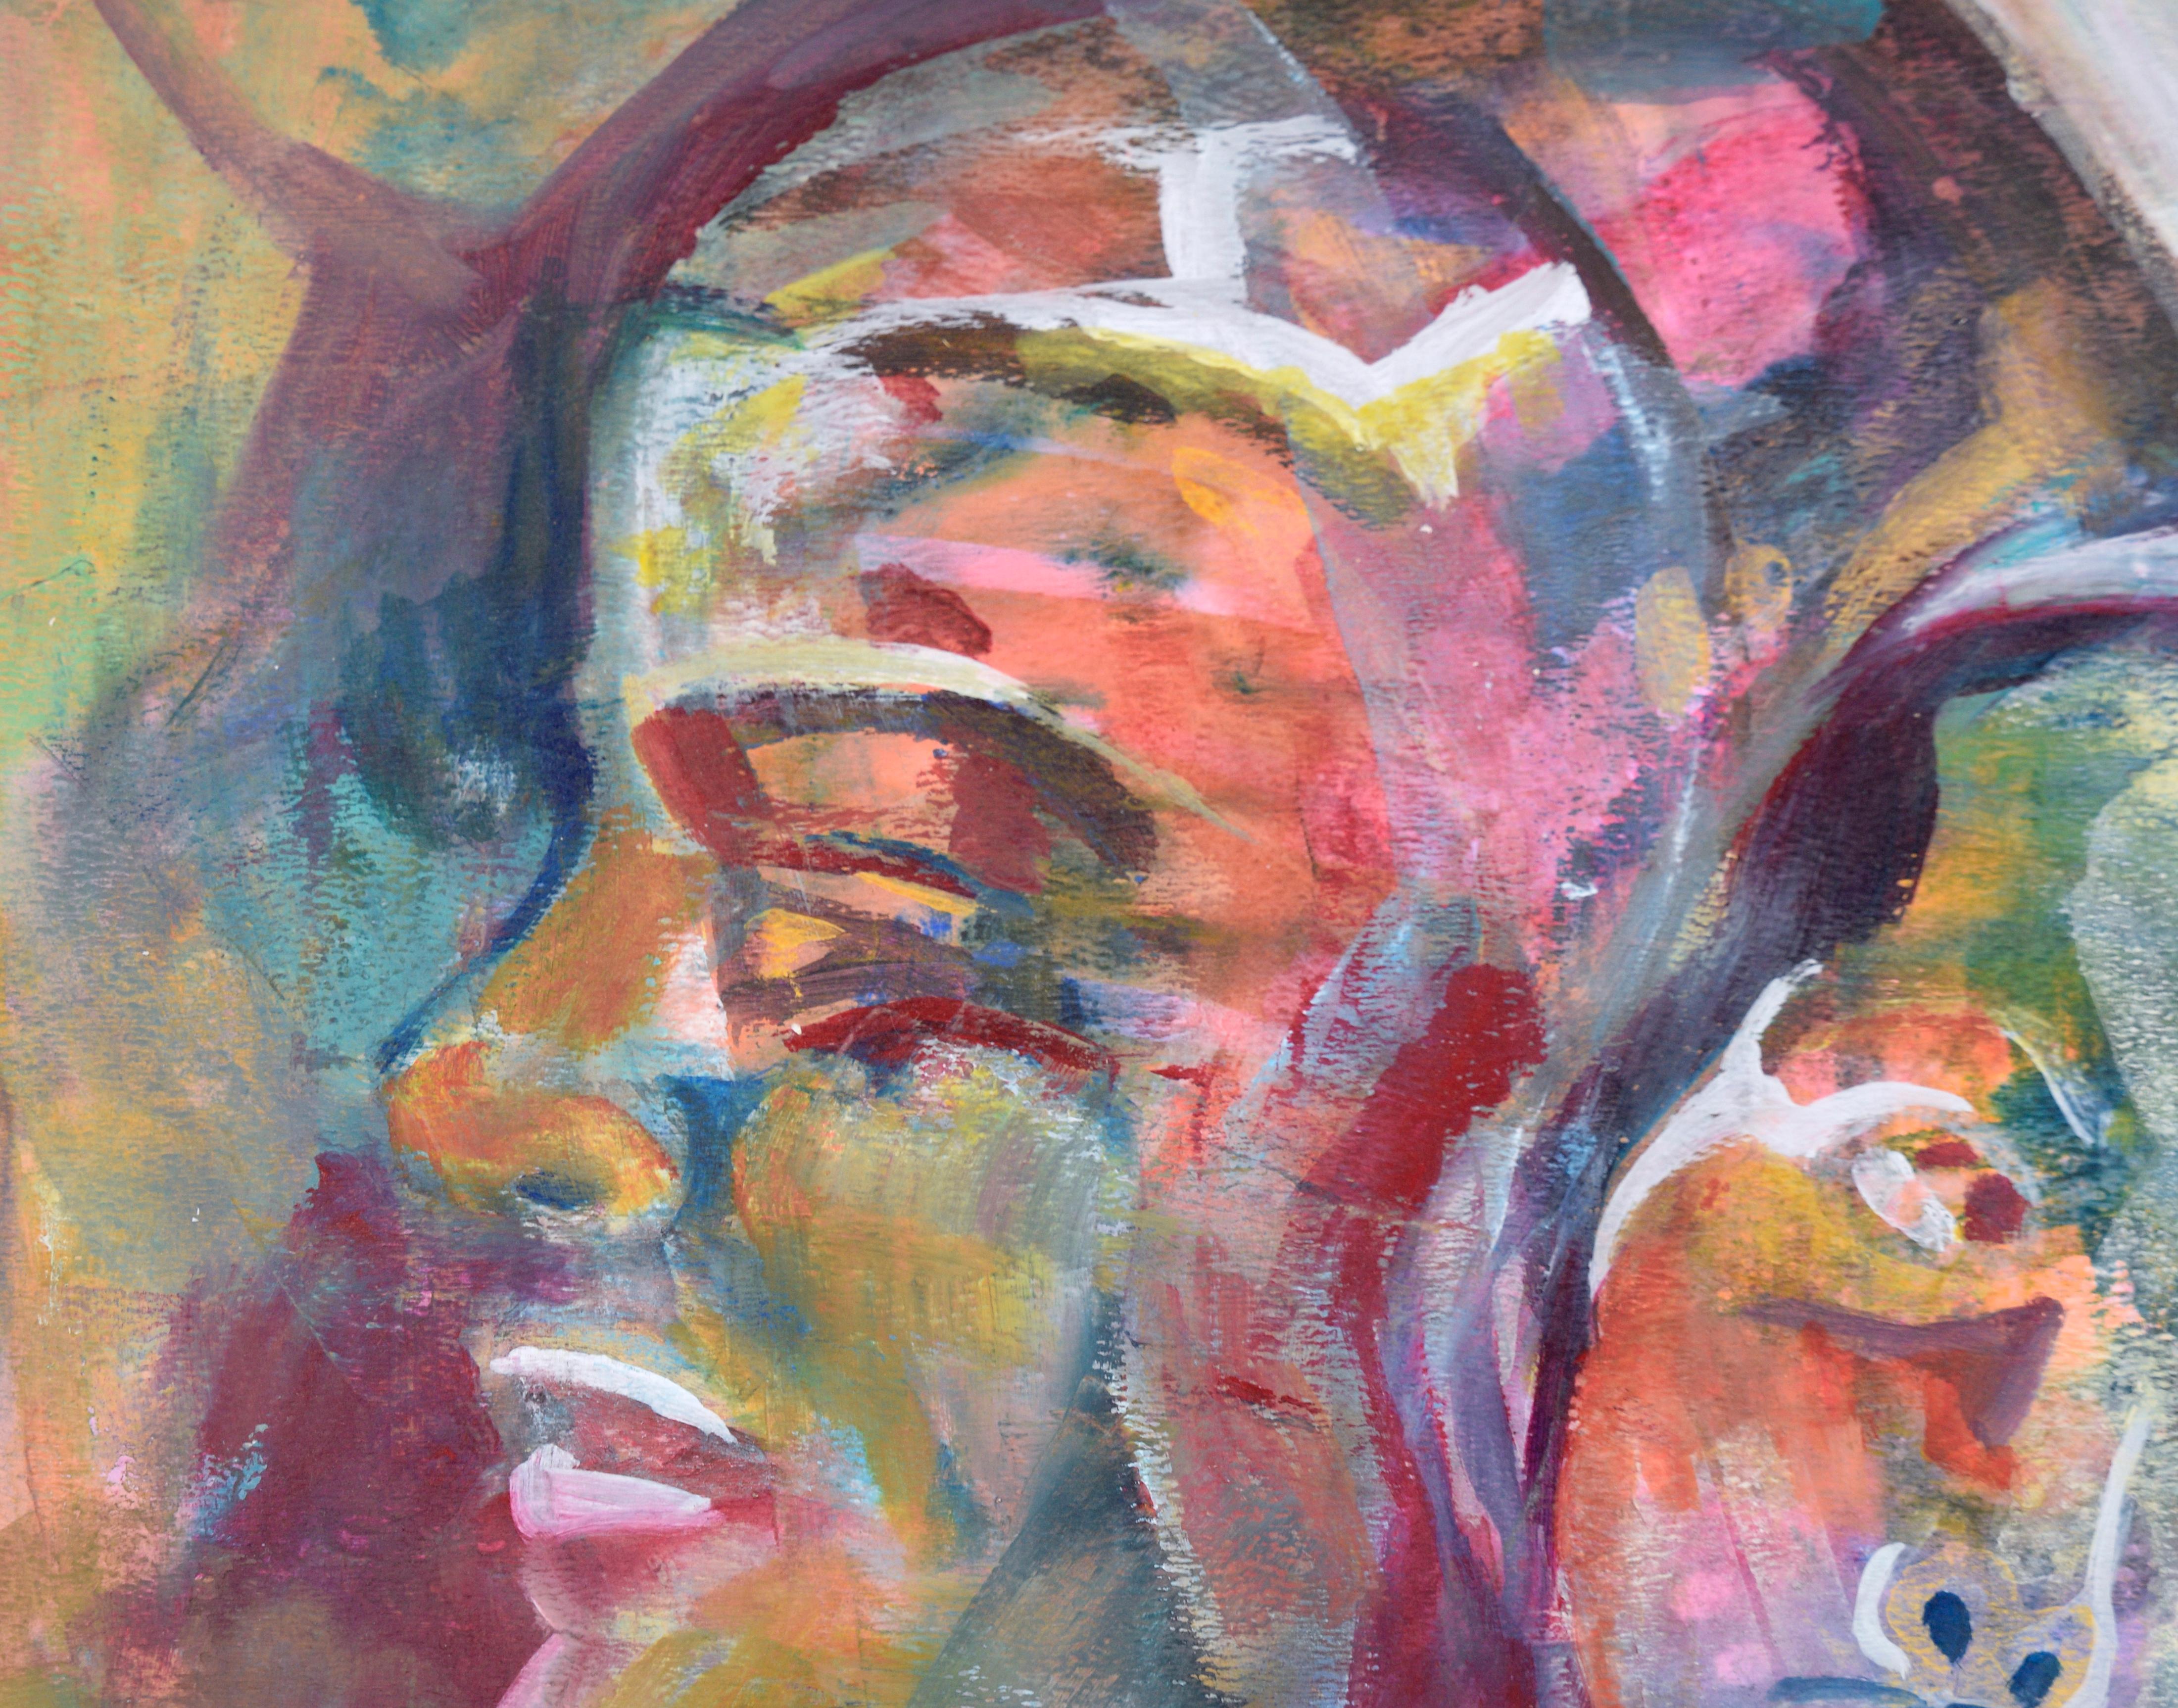 Fauvist Dual Portrait in Acrylic on Paper - Art by Virginia J. Hughins